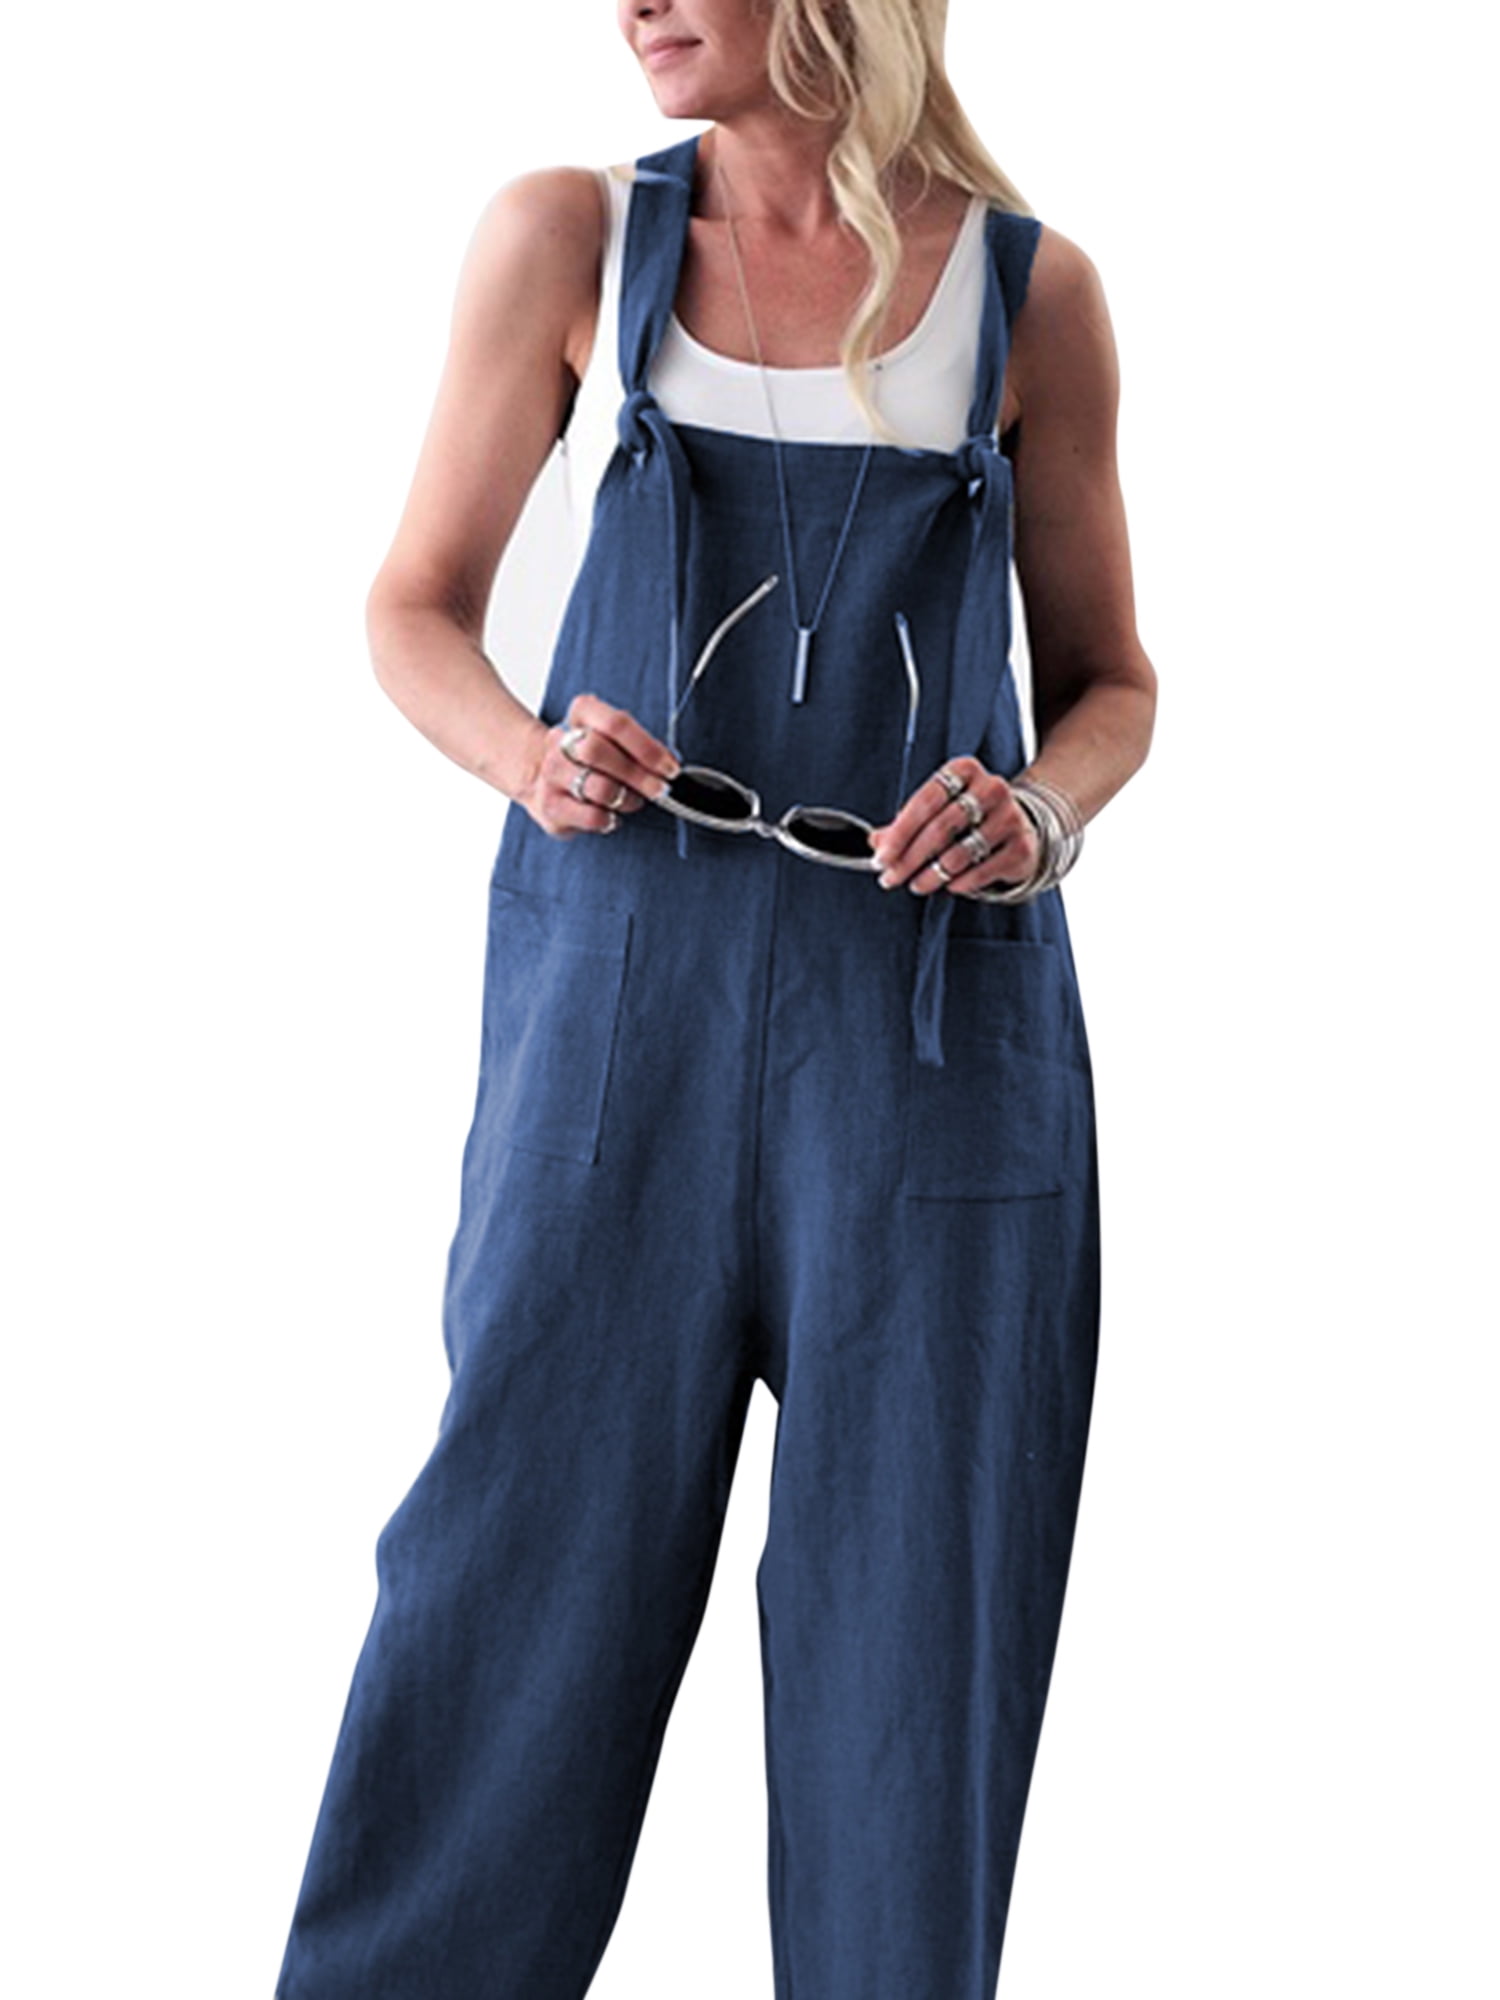 Womens Loose Baggy Cotton Wide Leg Jumpsuits Rompers Overalls Harem Pants Distressed 